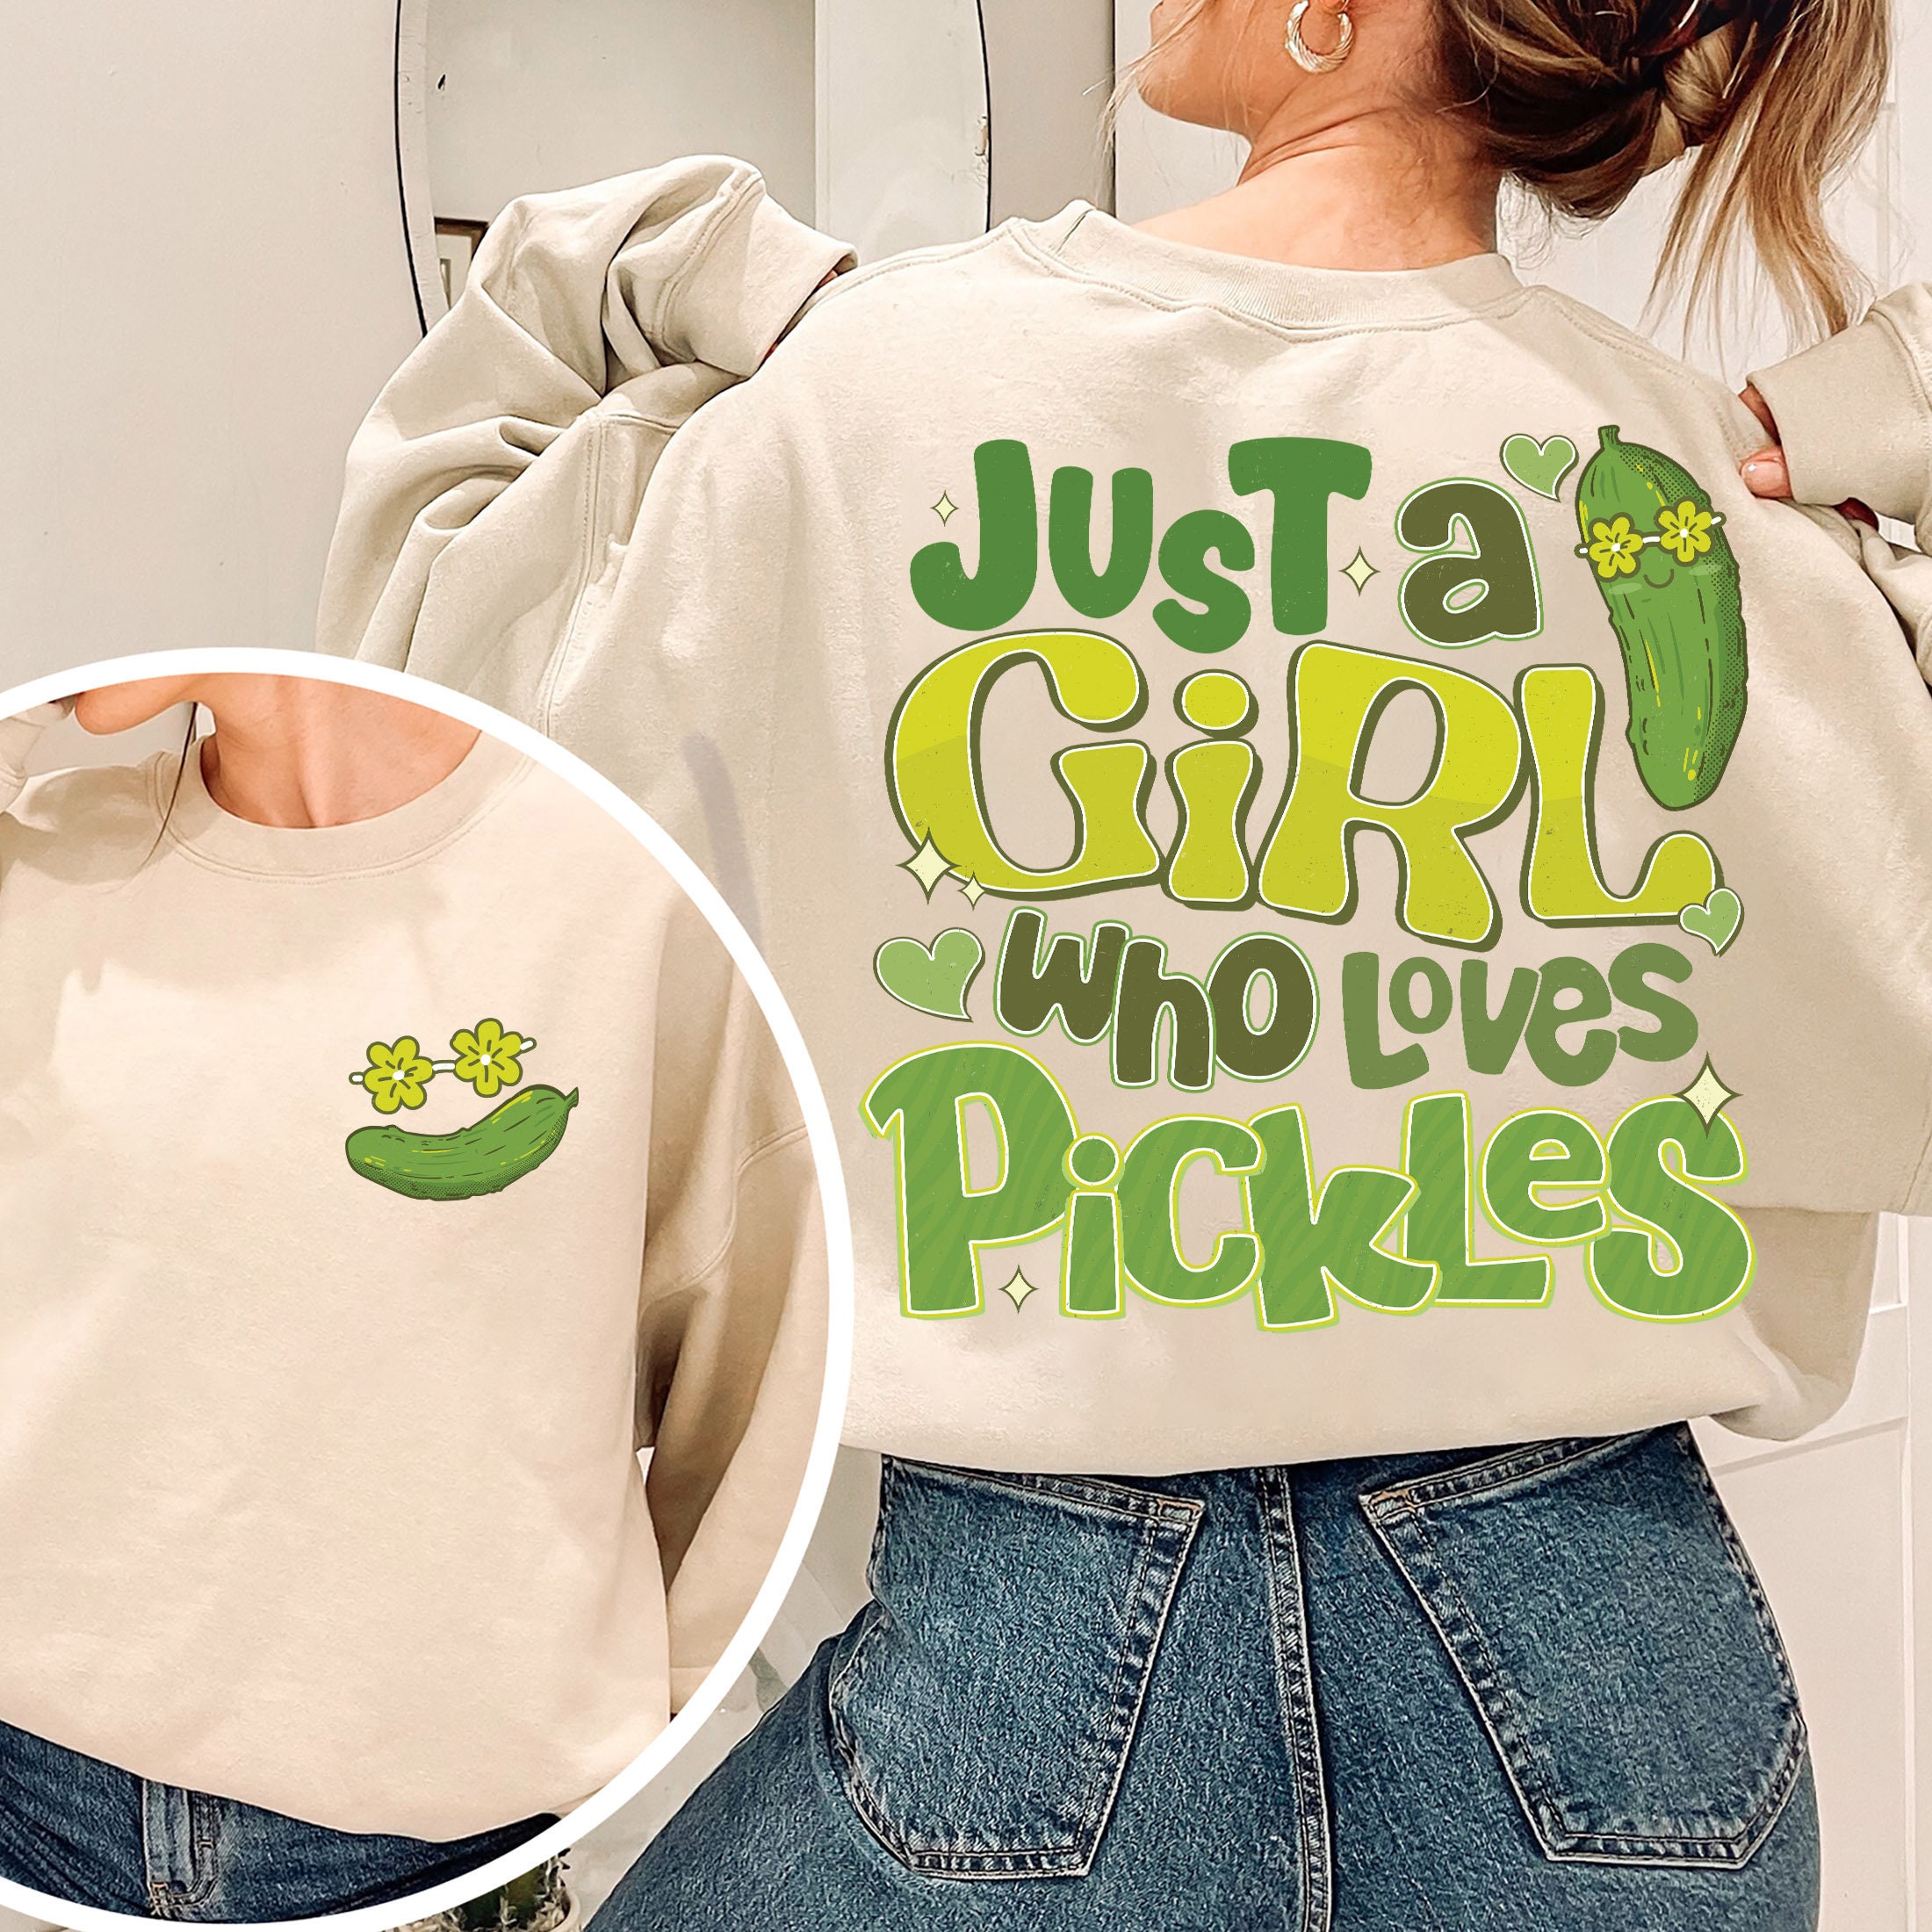 Just A Girl Who Loves Pickles - Cute Pickle Gift product Kids T-Shirt for  Sale by theodoros20